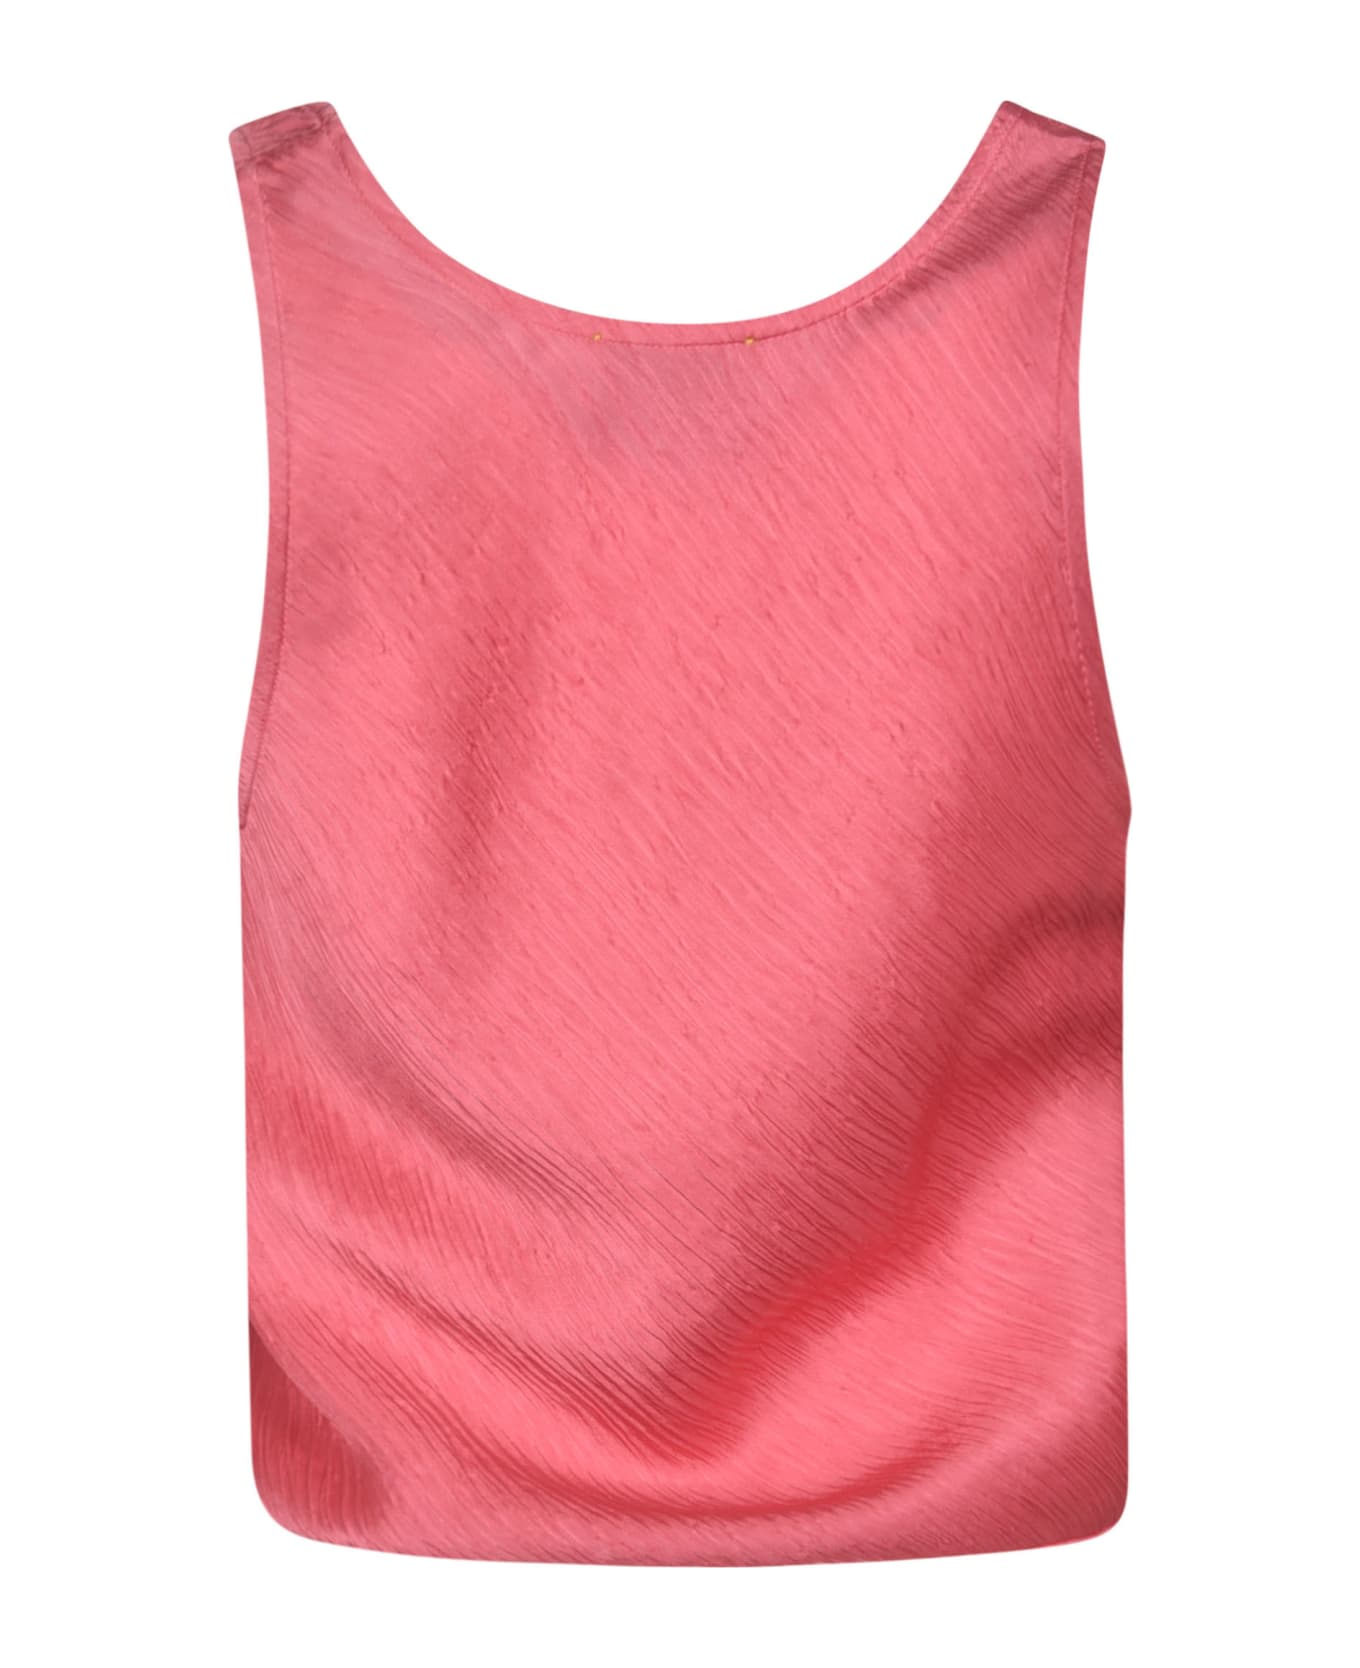 Forte_Forte Loose Fit Tank Top - Pink